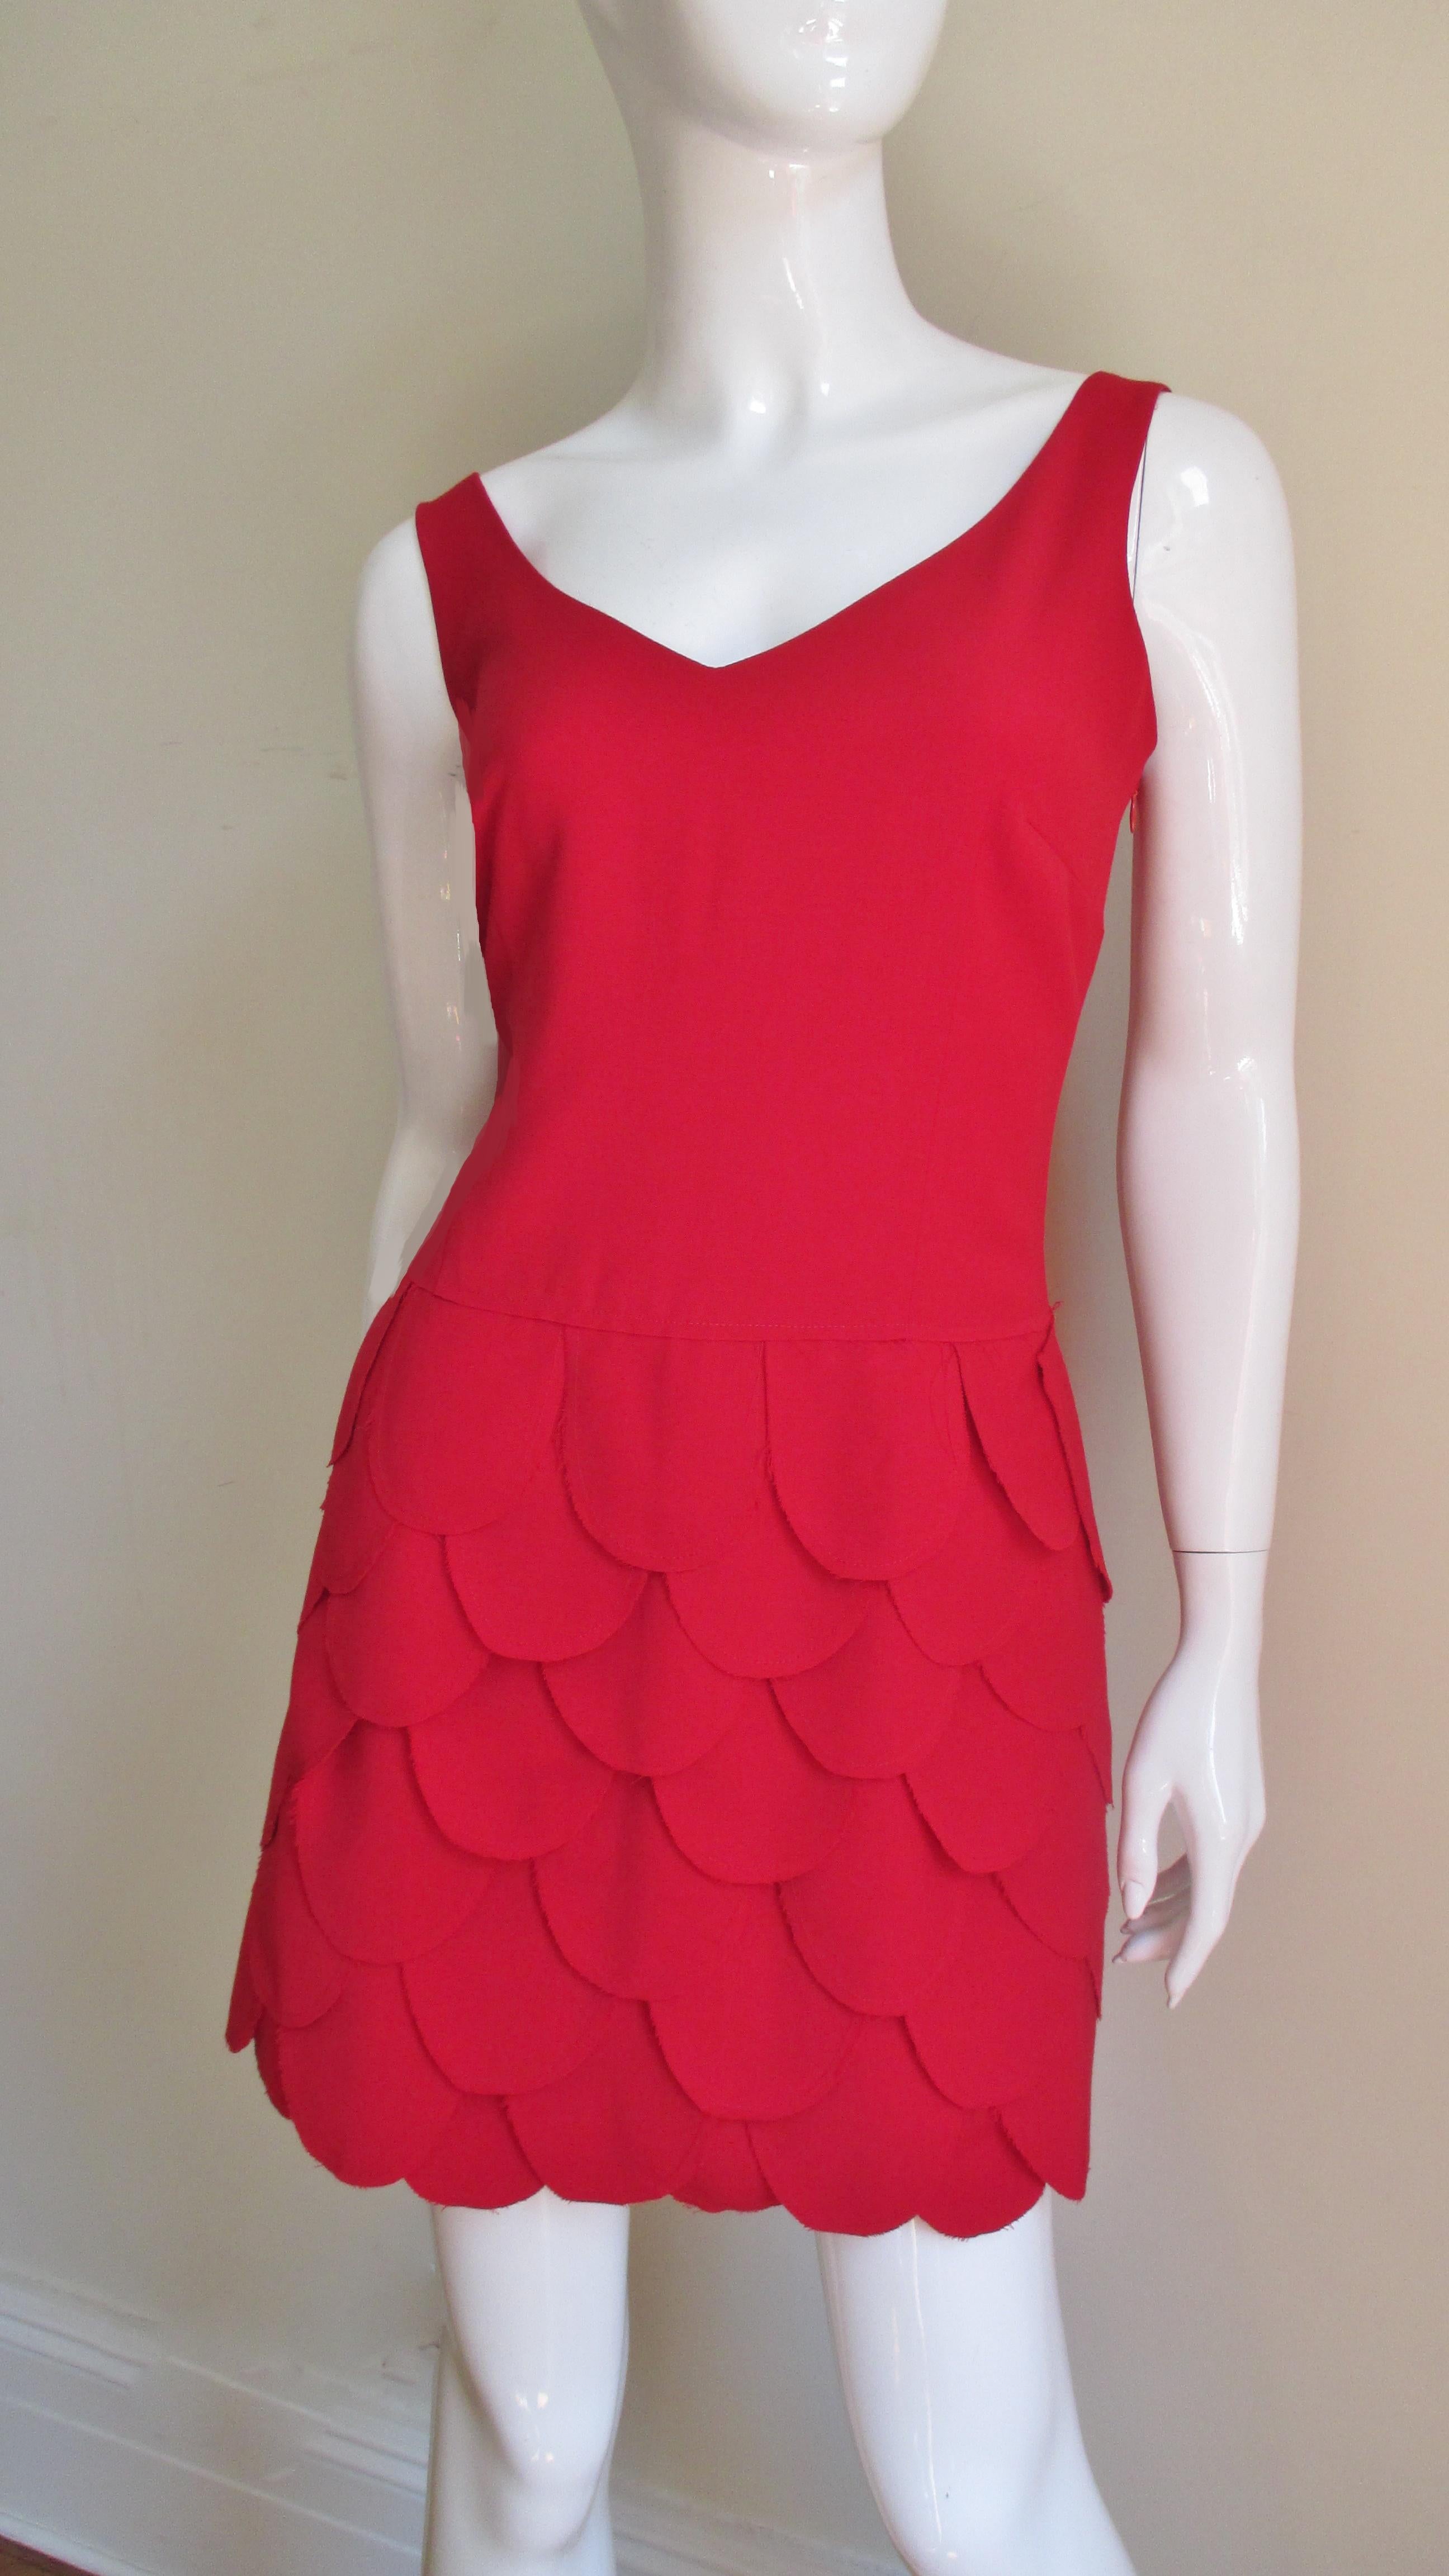 A fabulous light weight red wool dress from Moschino. It has a V neckline, scoop back and an A line skirt completely adorned in rows of overlapping individual fabric petals.  It is fully lined in matching red and has a side zipper.
New with tags